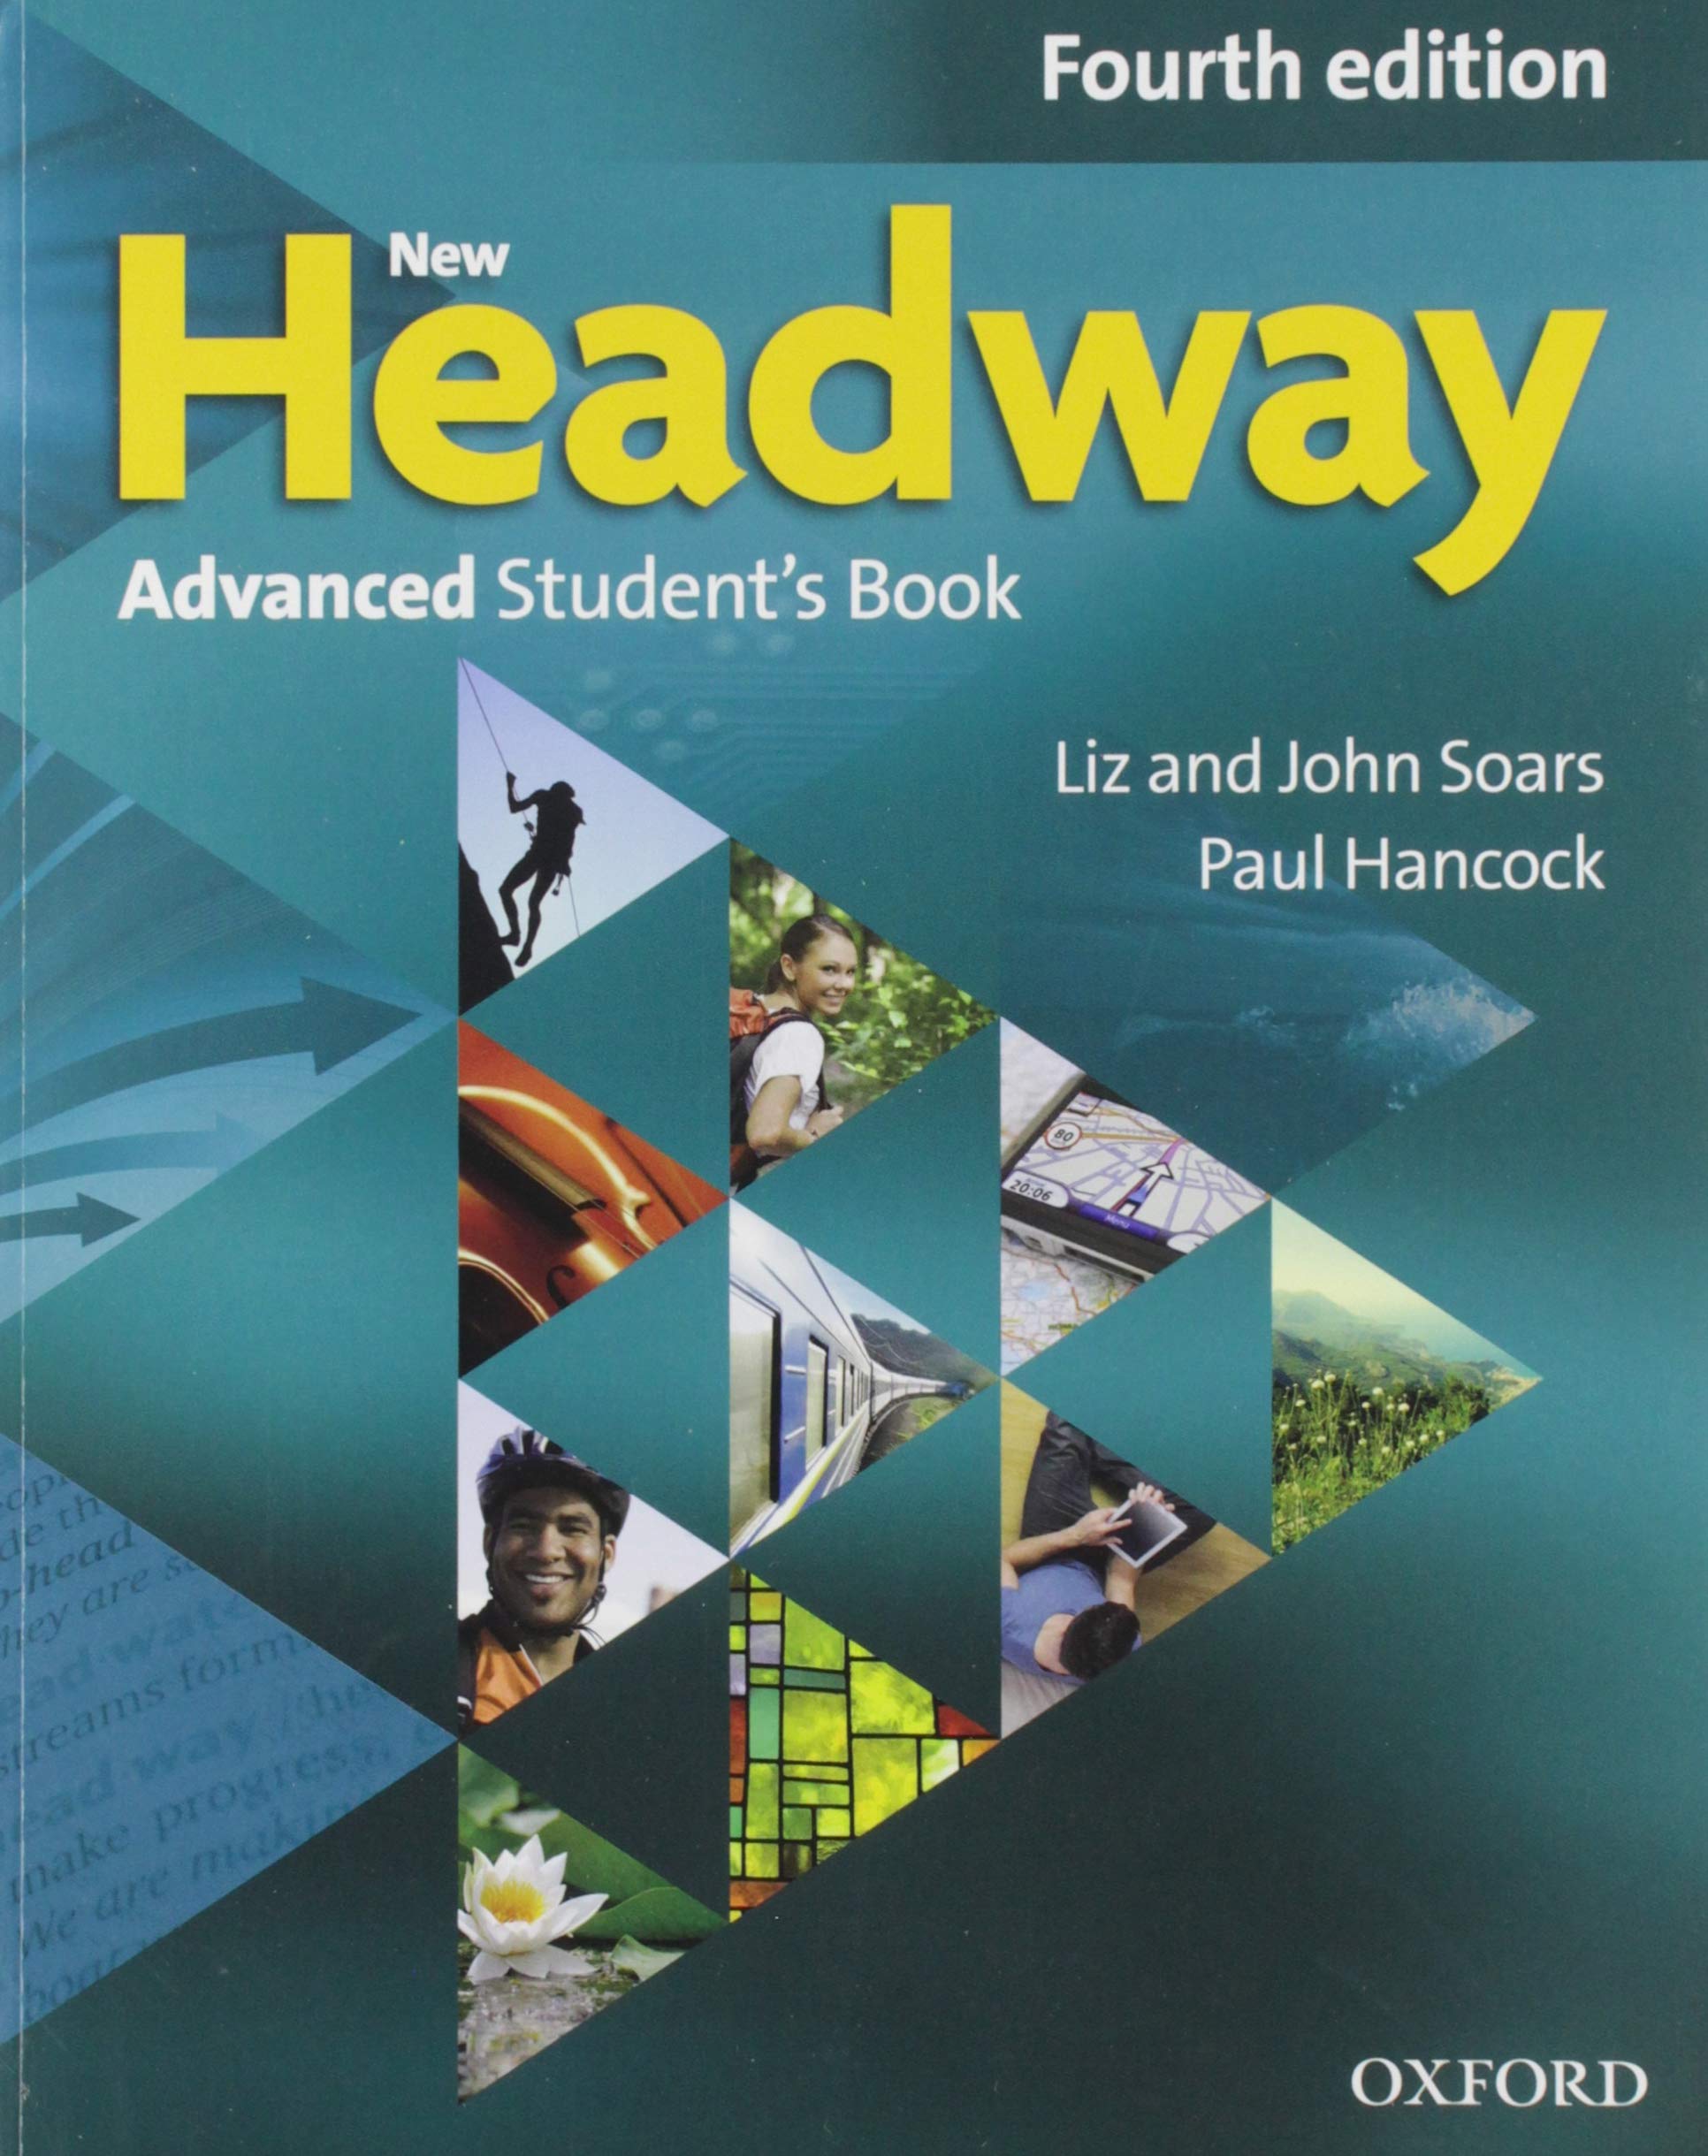 NEW HEADWAY ADVANCED 4th ED Student's Book 